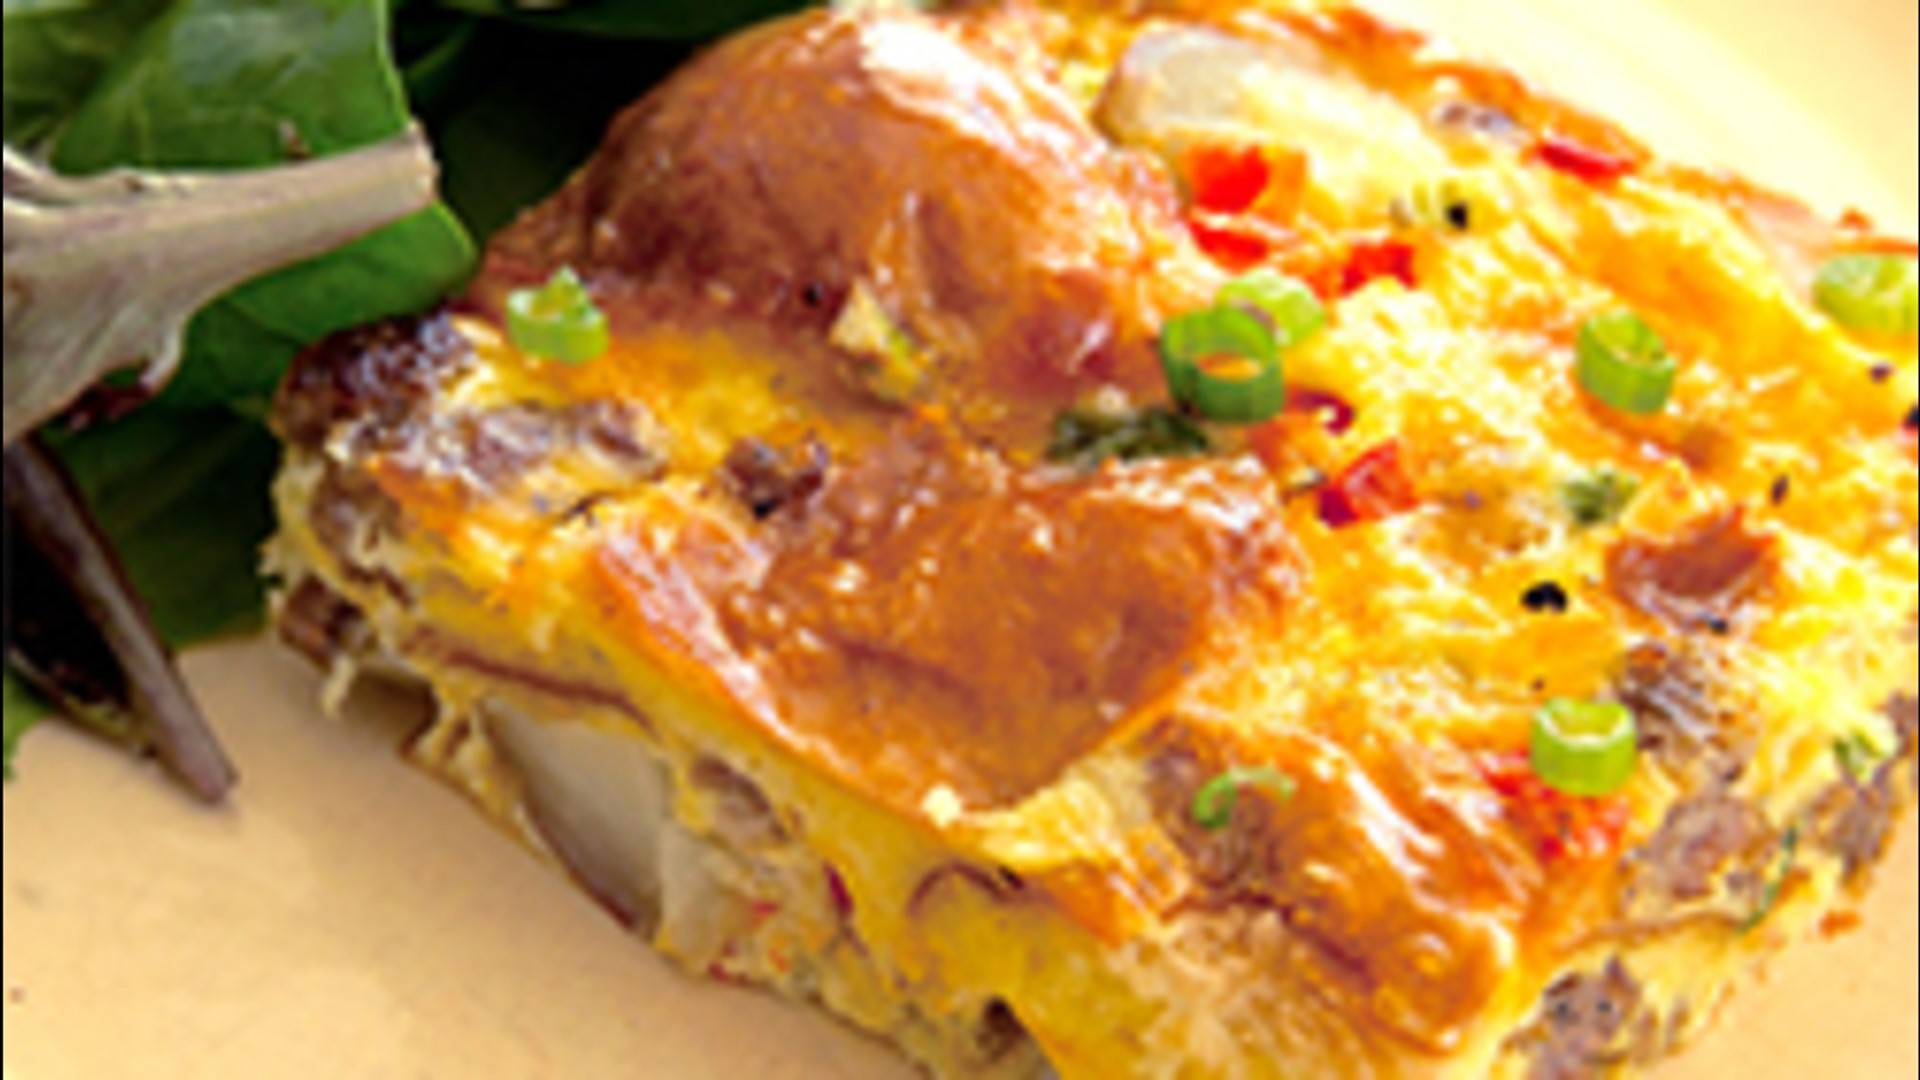 Behold, the breakfast casserole that really does have it all.  It's easy to whip together, feeds a ton of people, and has all your major food groups represented: eggs, potatoes, sausage, veggies and bread. So, there's no need for any additional sides nor 